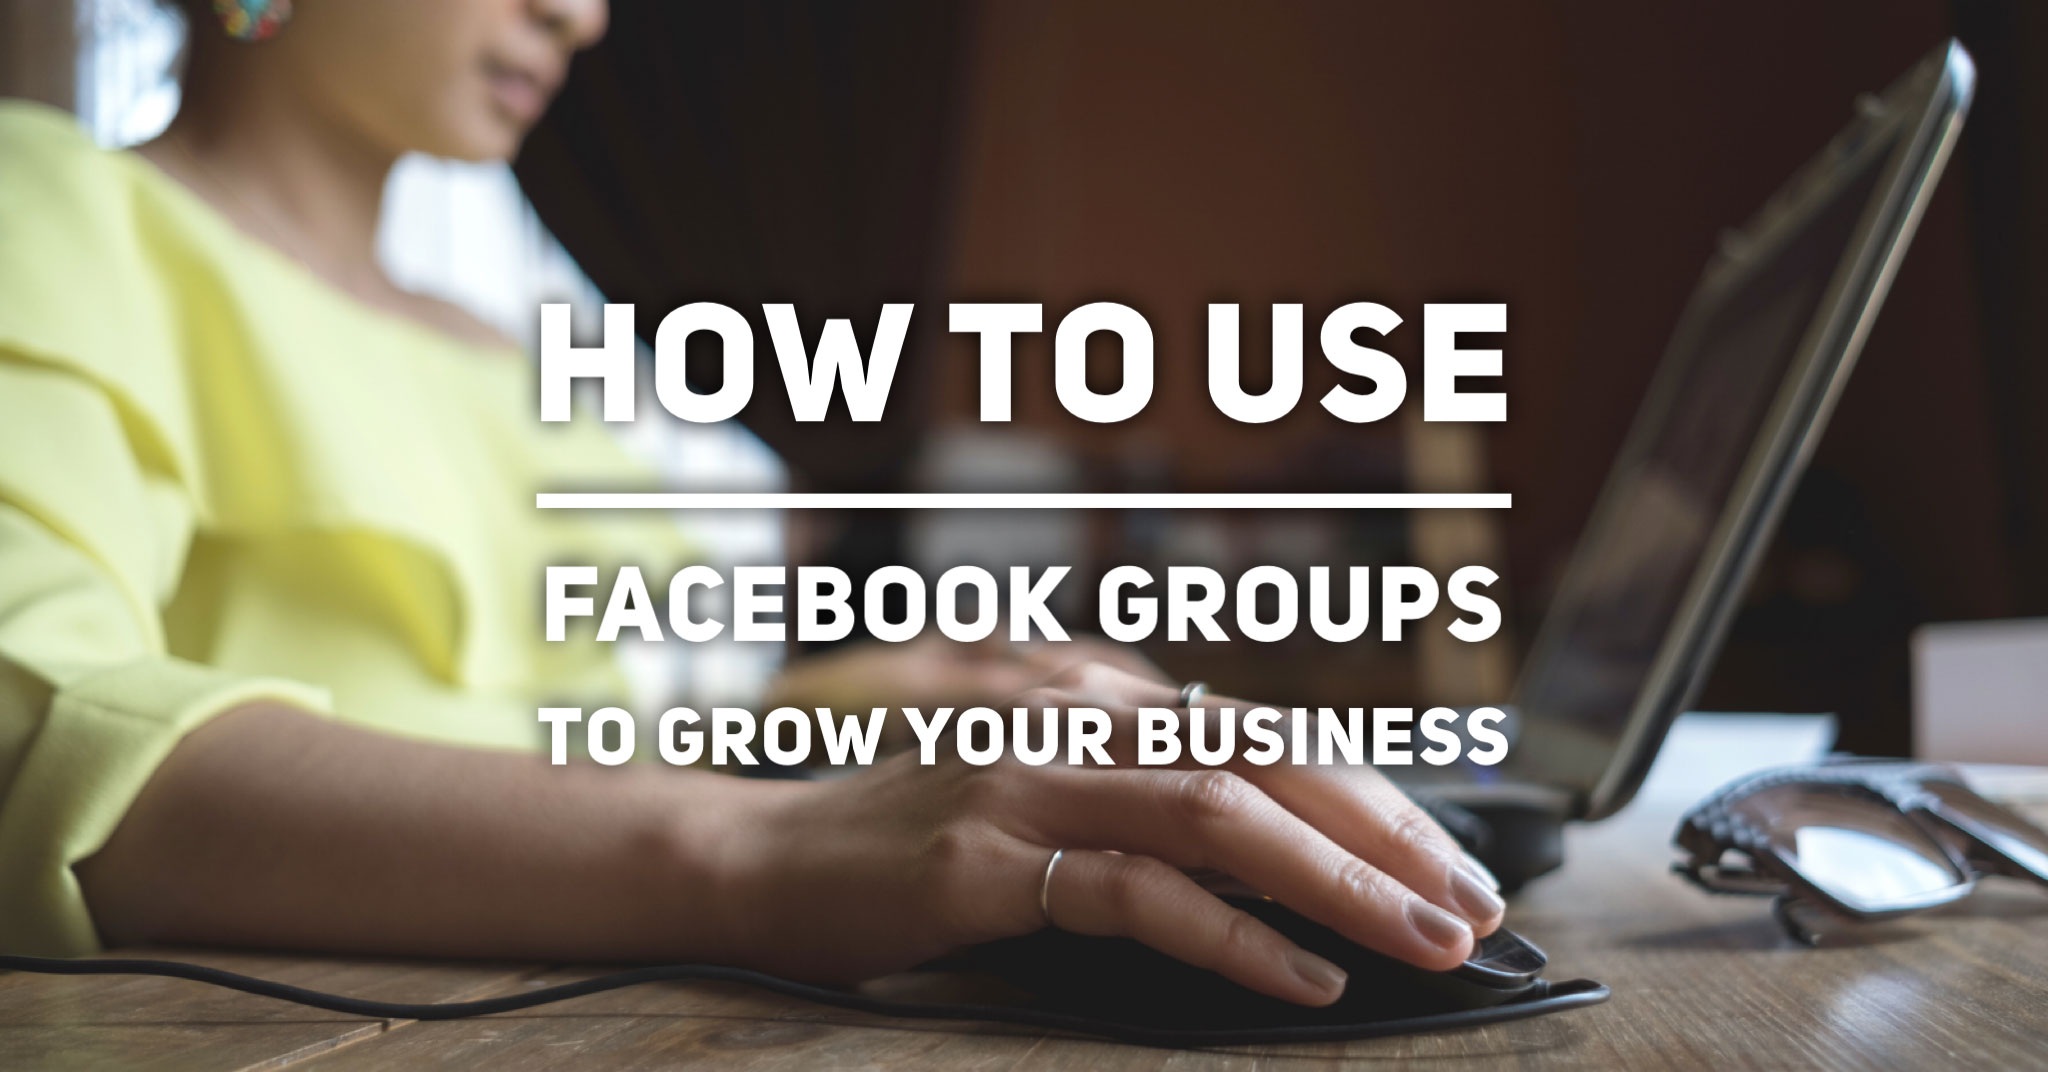 How to Use Facebook Groups for Small Business